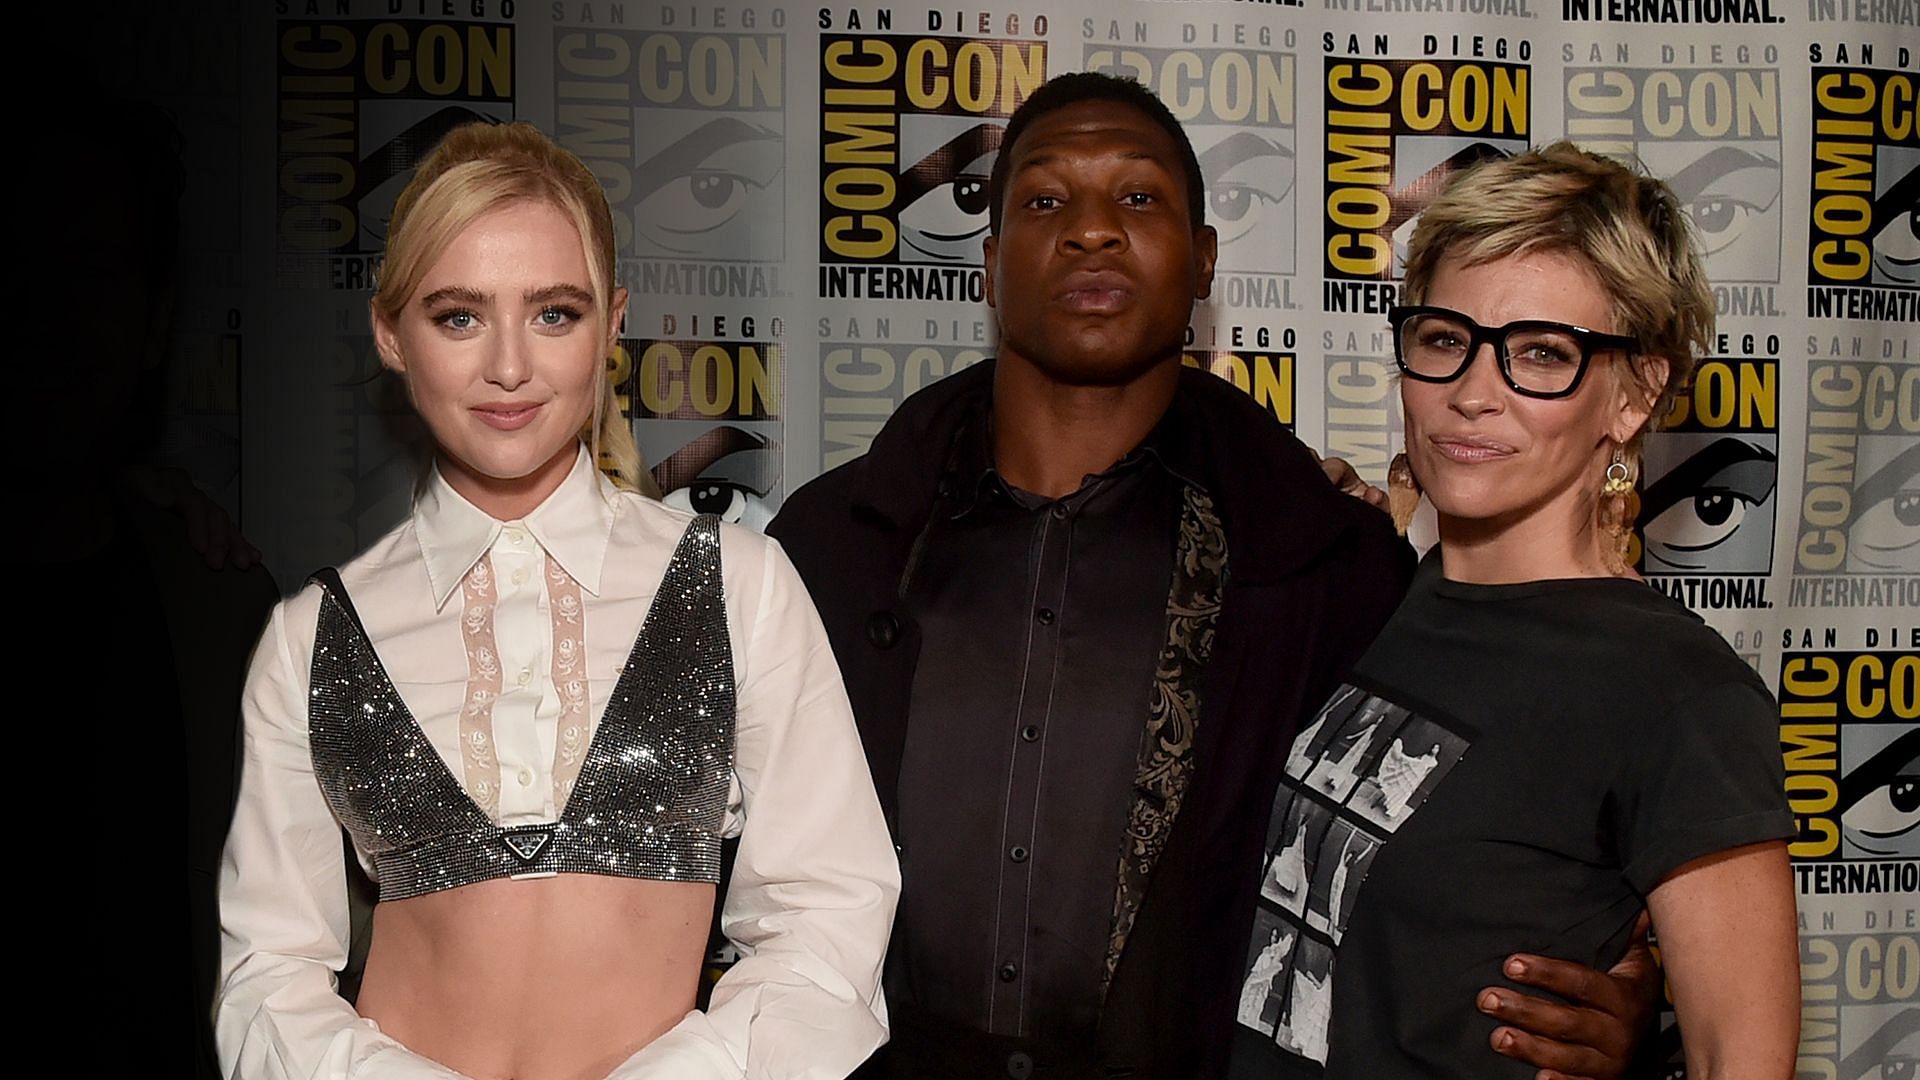 From Left to Right: Kathryn Newton (Cassie Lang), Jonathan Majors (Kang the Conqueror) and Evangeline Lilly (Wasp/Hope van Dyne) at San Diego Comic-Con 2022 (Image Credit: iMDB)